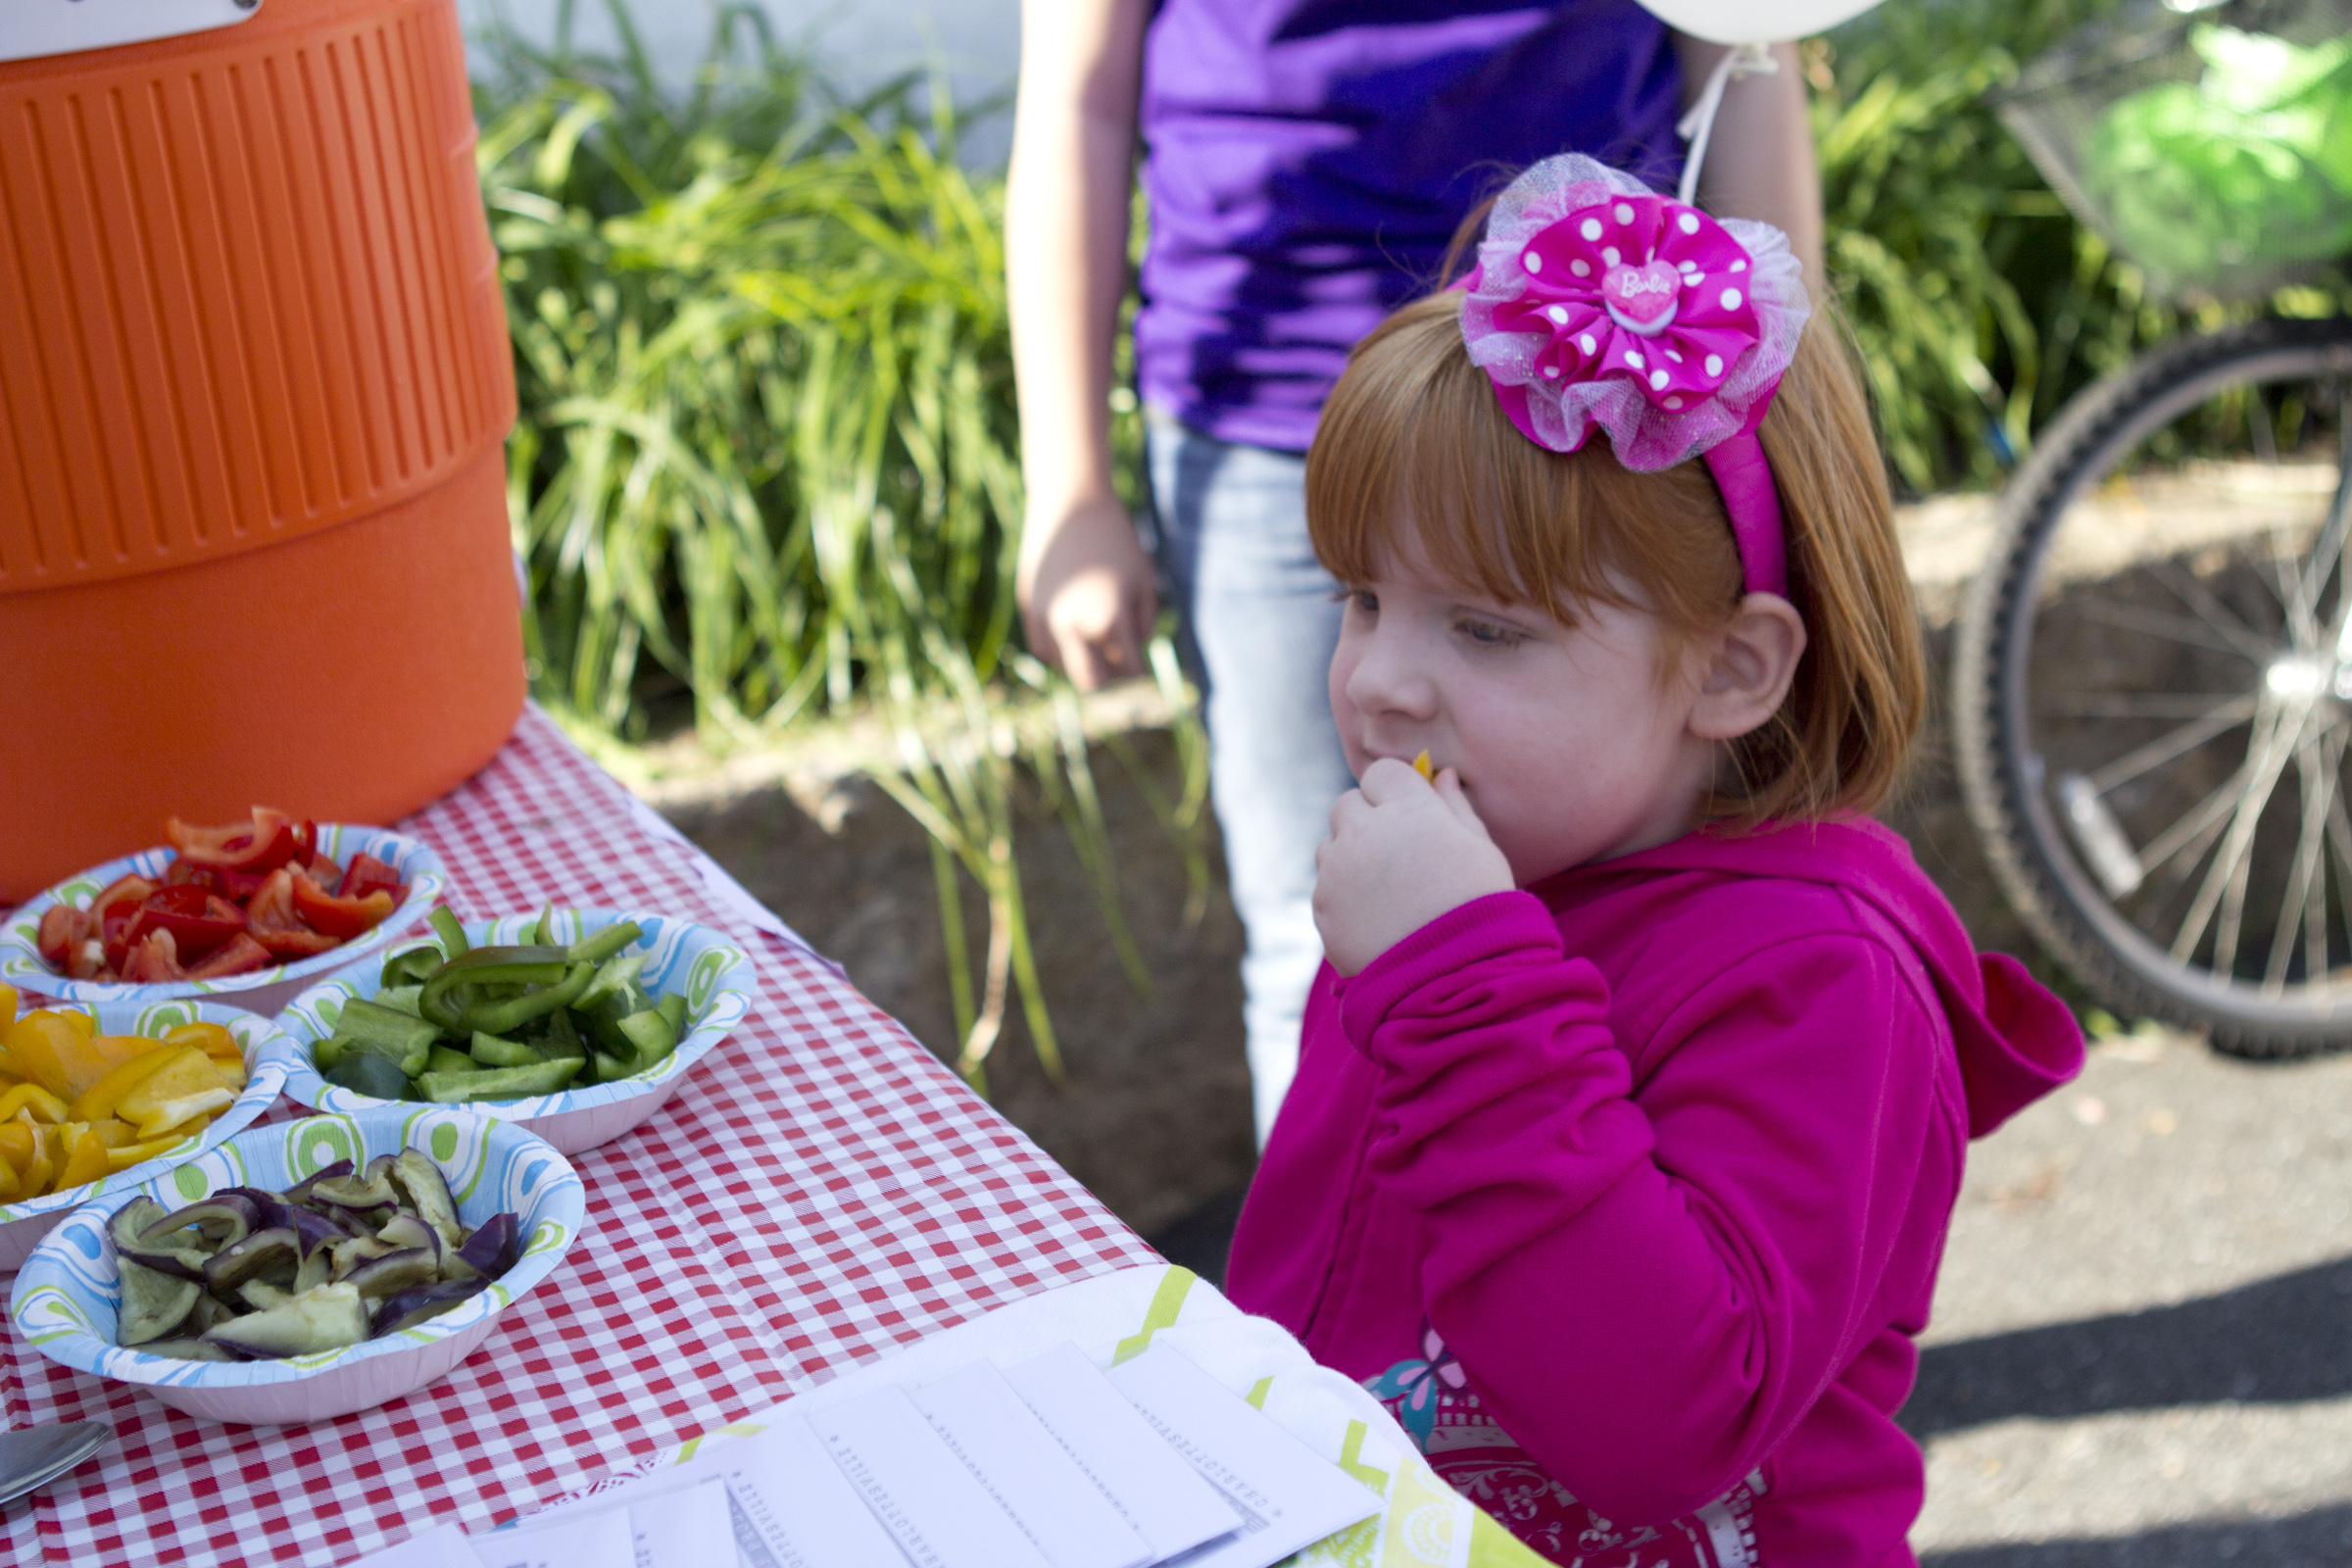 Child eating veggies at a picnic table